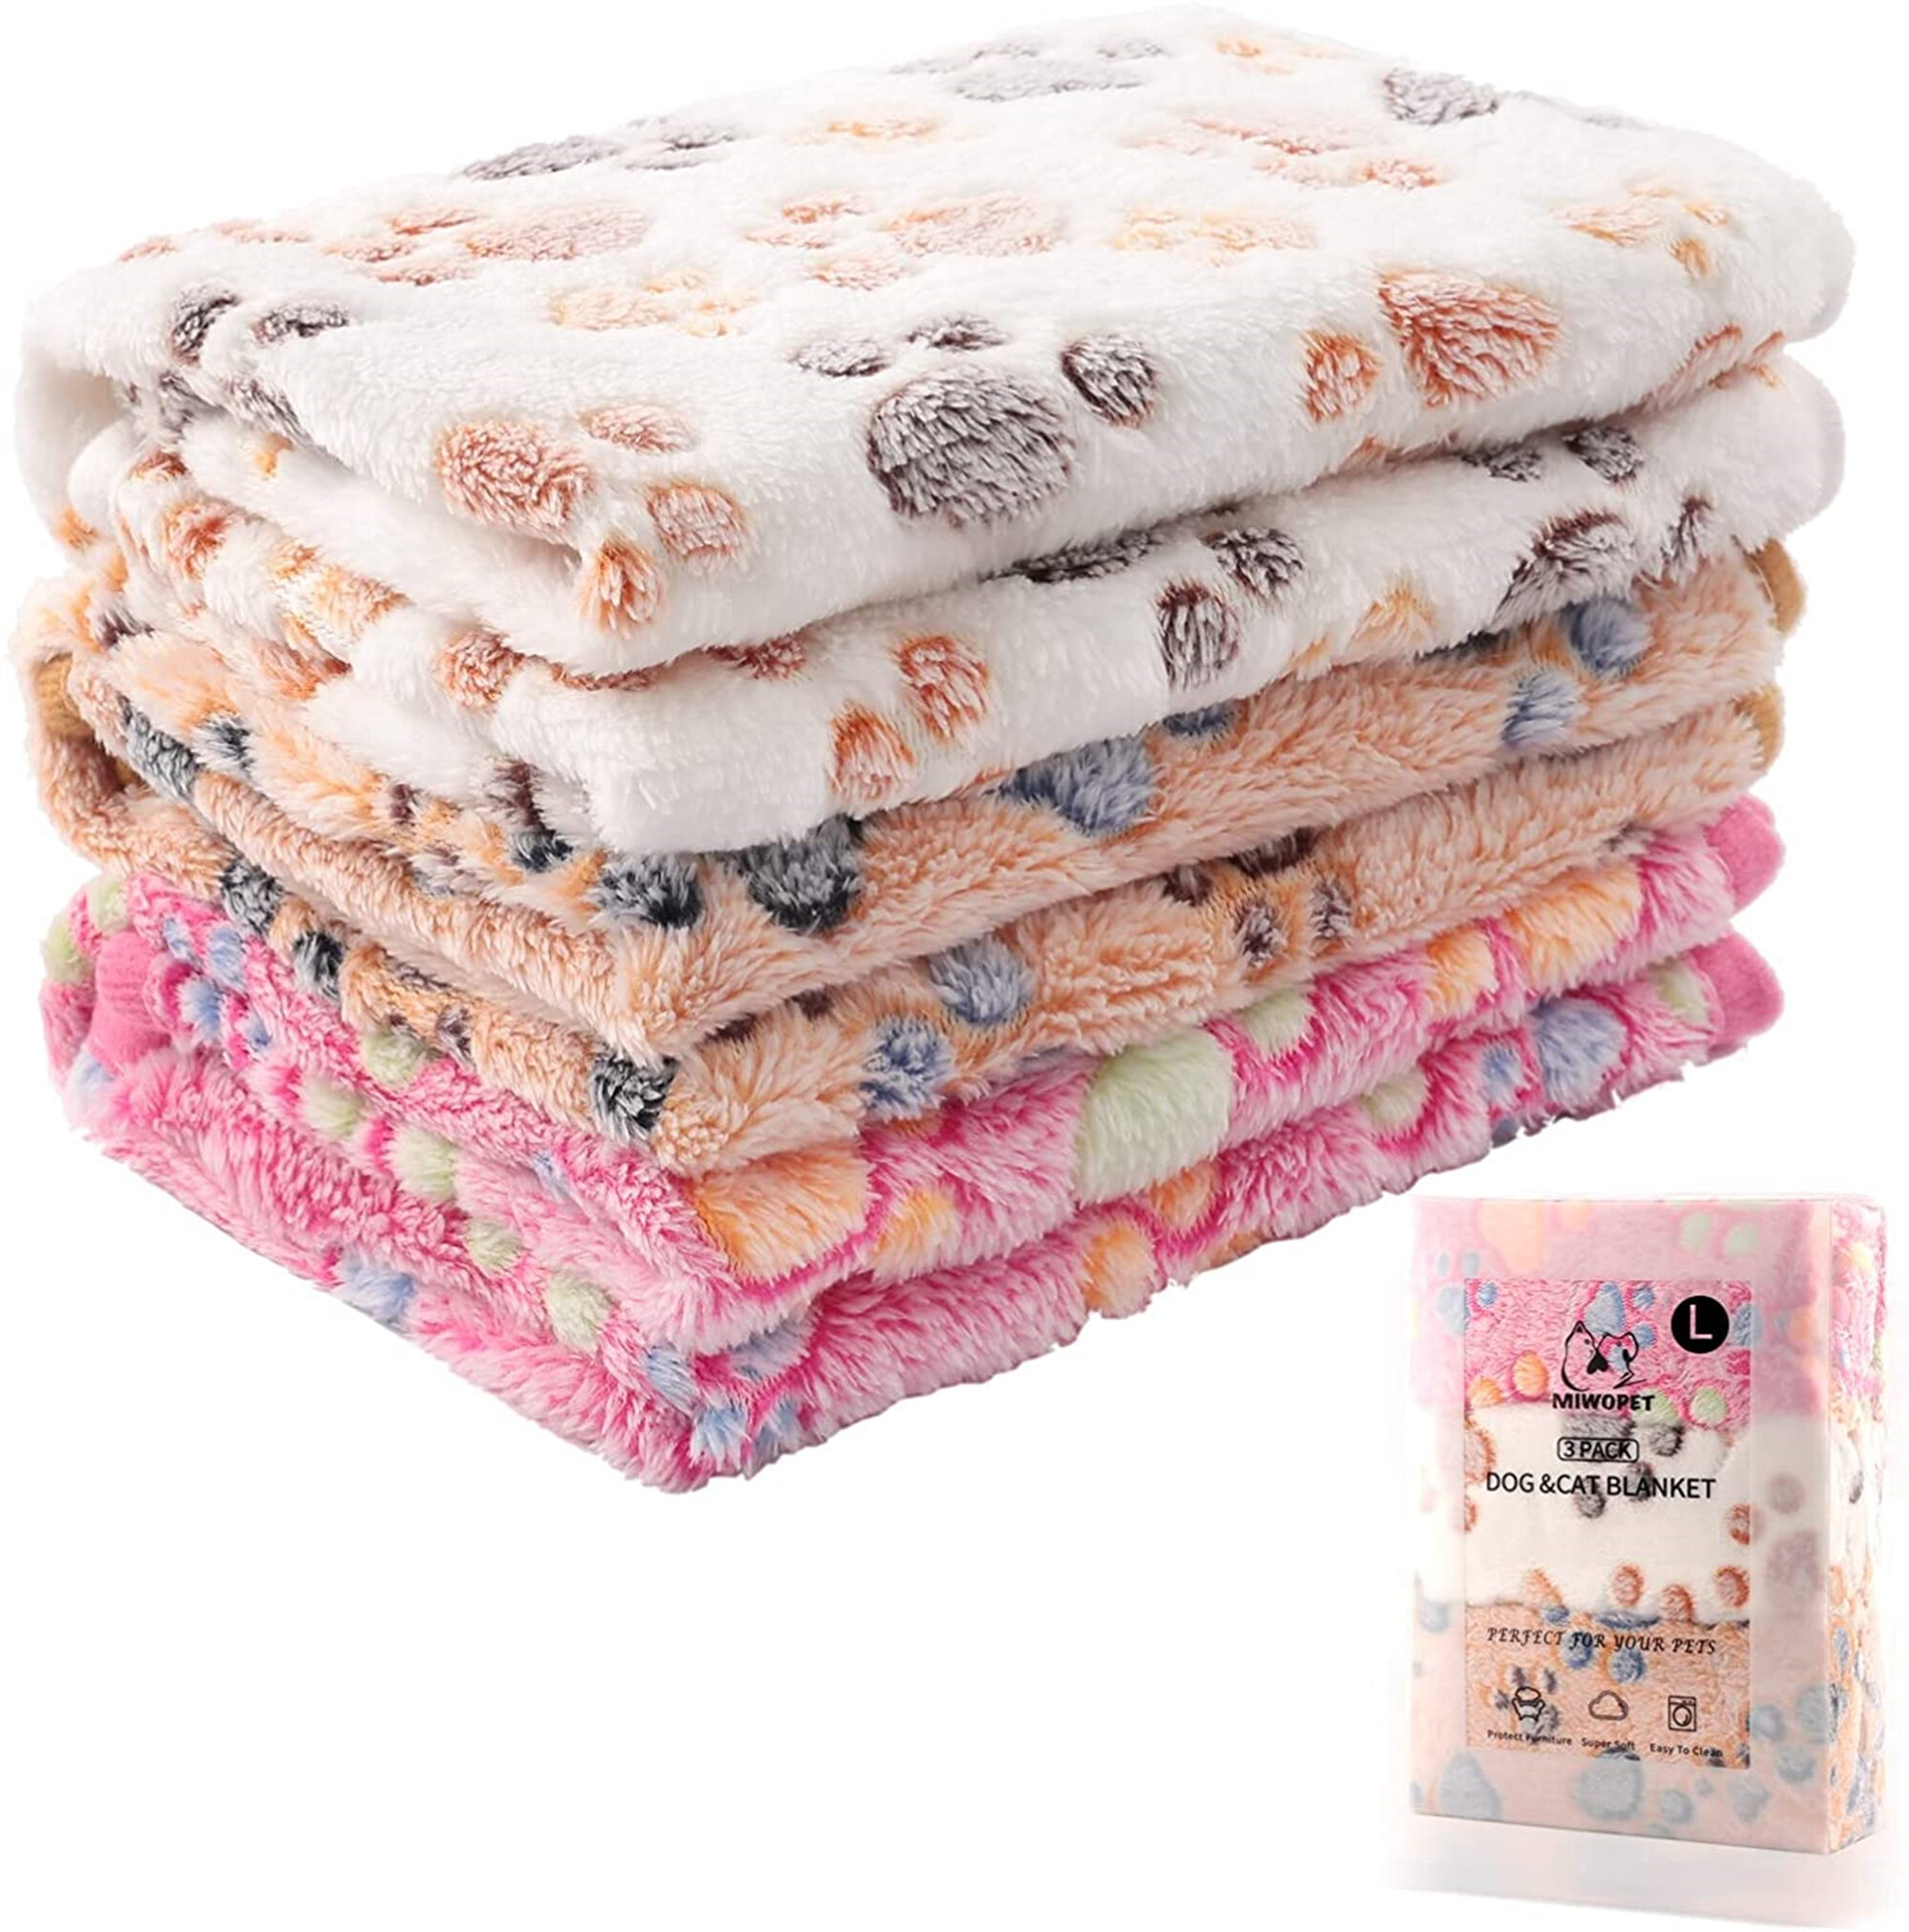 23x16 1 Pack 3 Puppy Blankets Super Soft Warm Sleep Mat Grey PAW Print Cute Blanket Fluffy Fleece Pet Blanket Flannel Throw Dog Blankets for Small Dogs Puppy Dogs Fluffy Cats,Small 